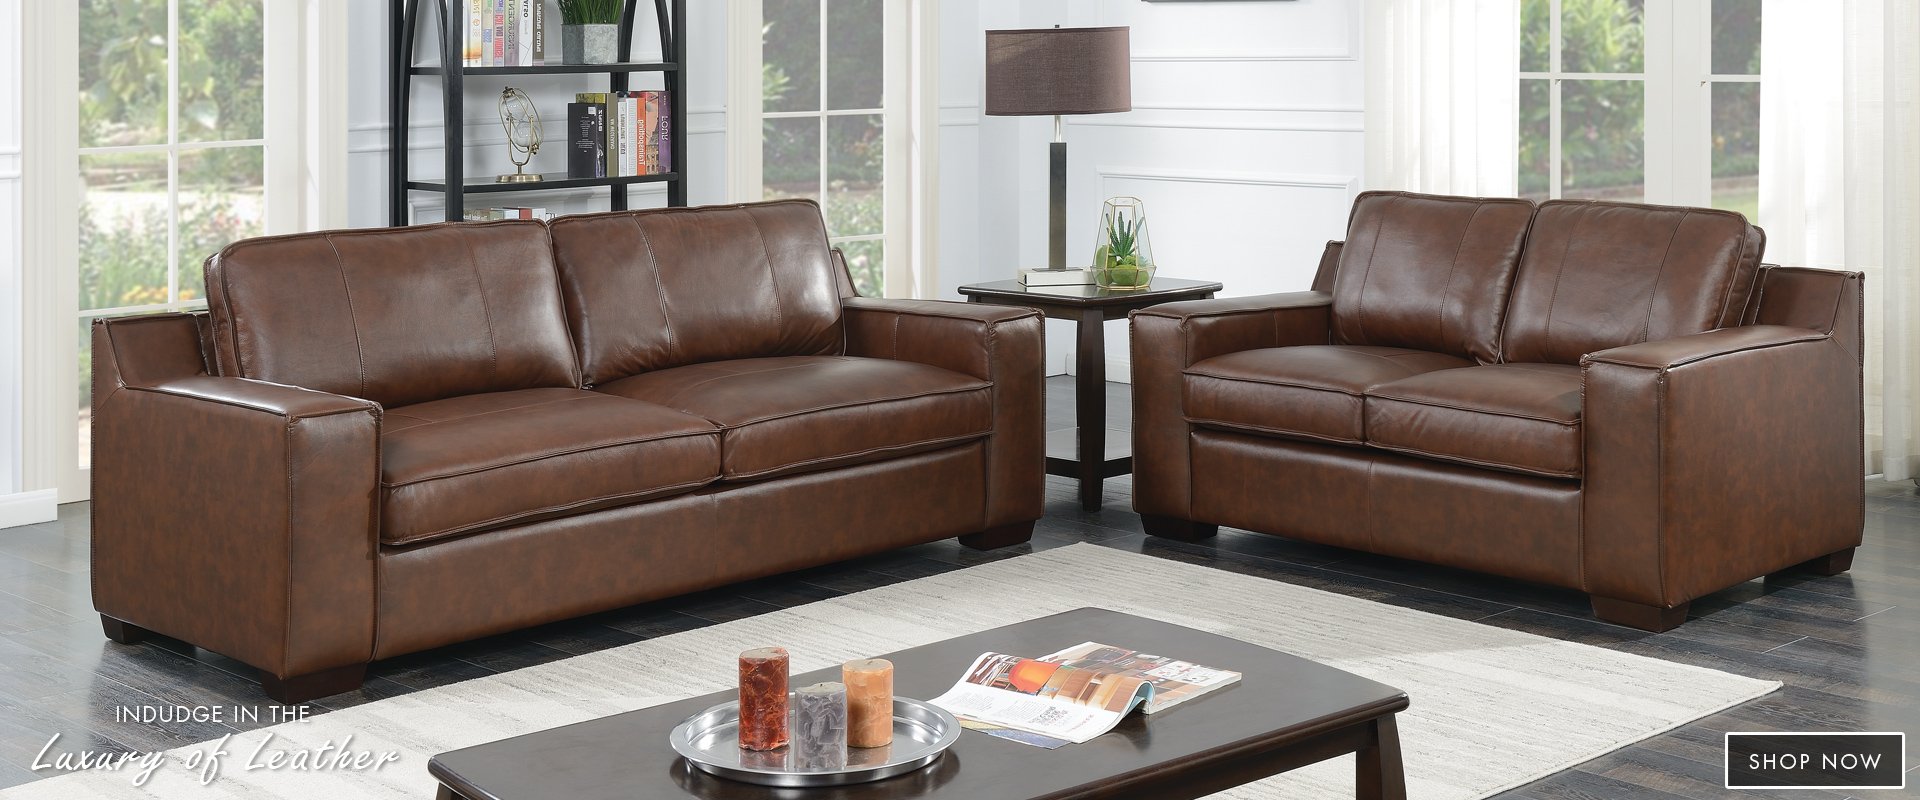 Jennifer Furniture Buy Home Furniture In New York New Jersey Ct